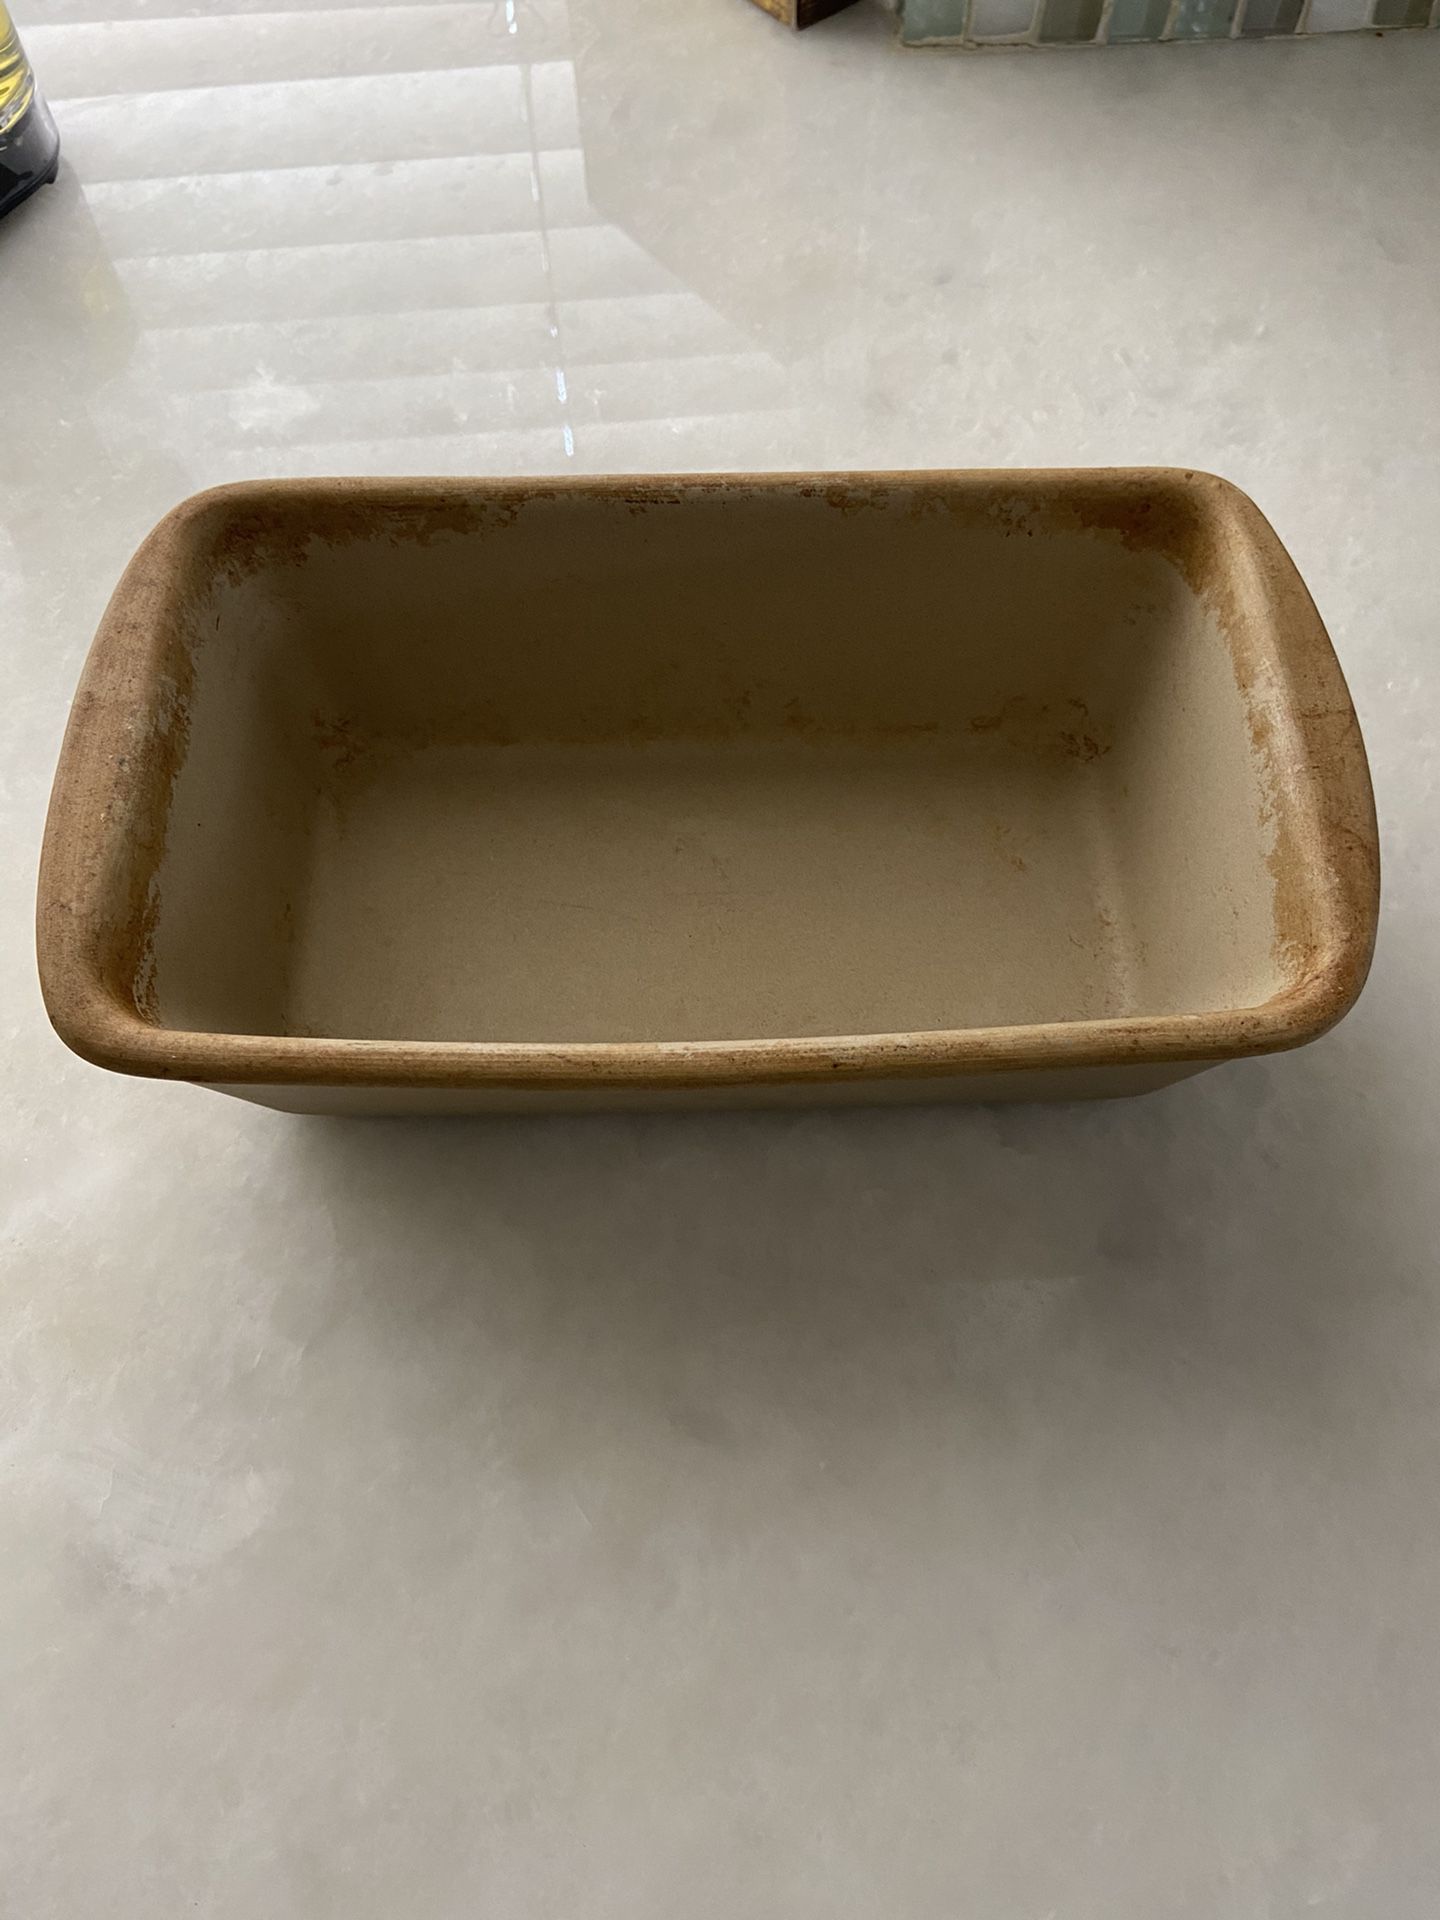 Pampered Chef stoneware loaf pan